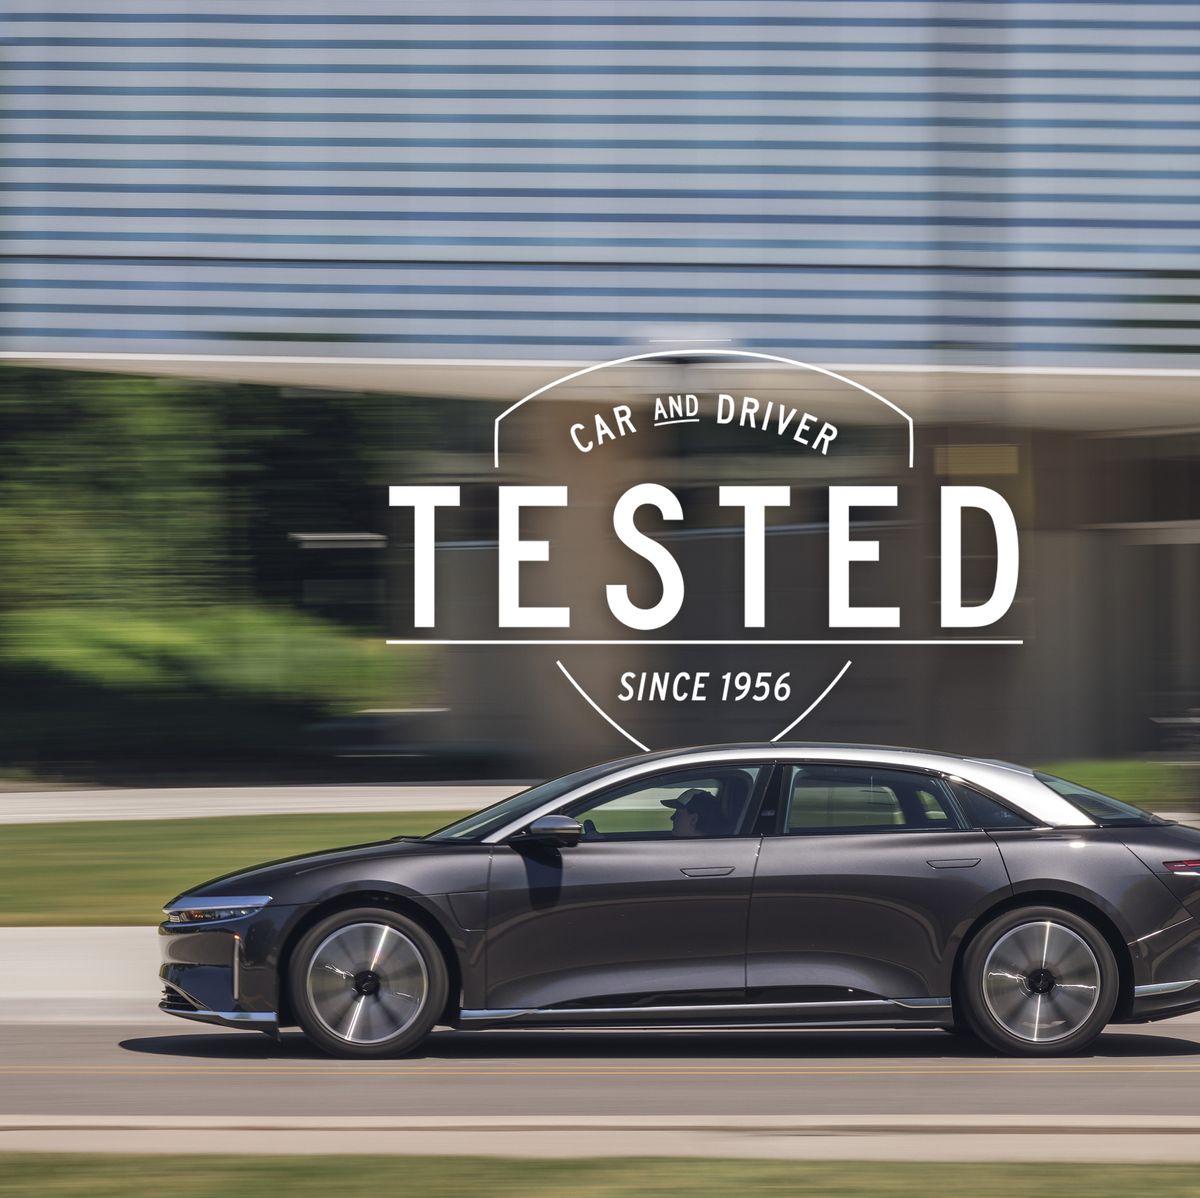 Lucid Air May Be the Most Efficient Electric Car